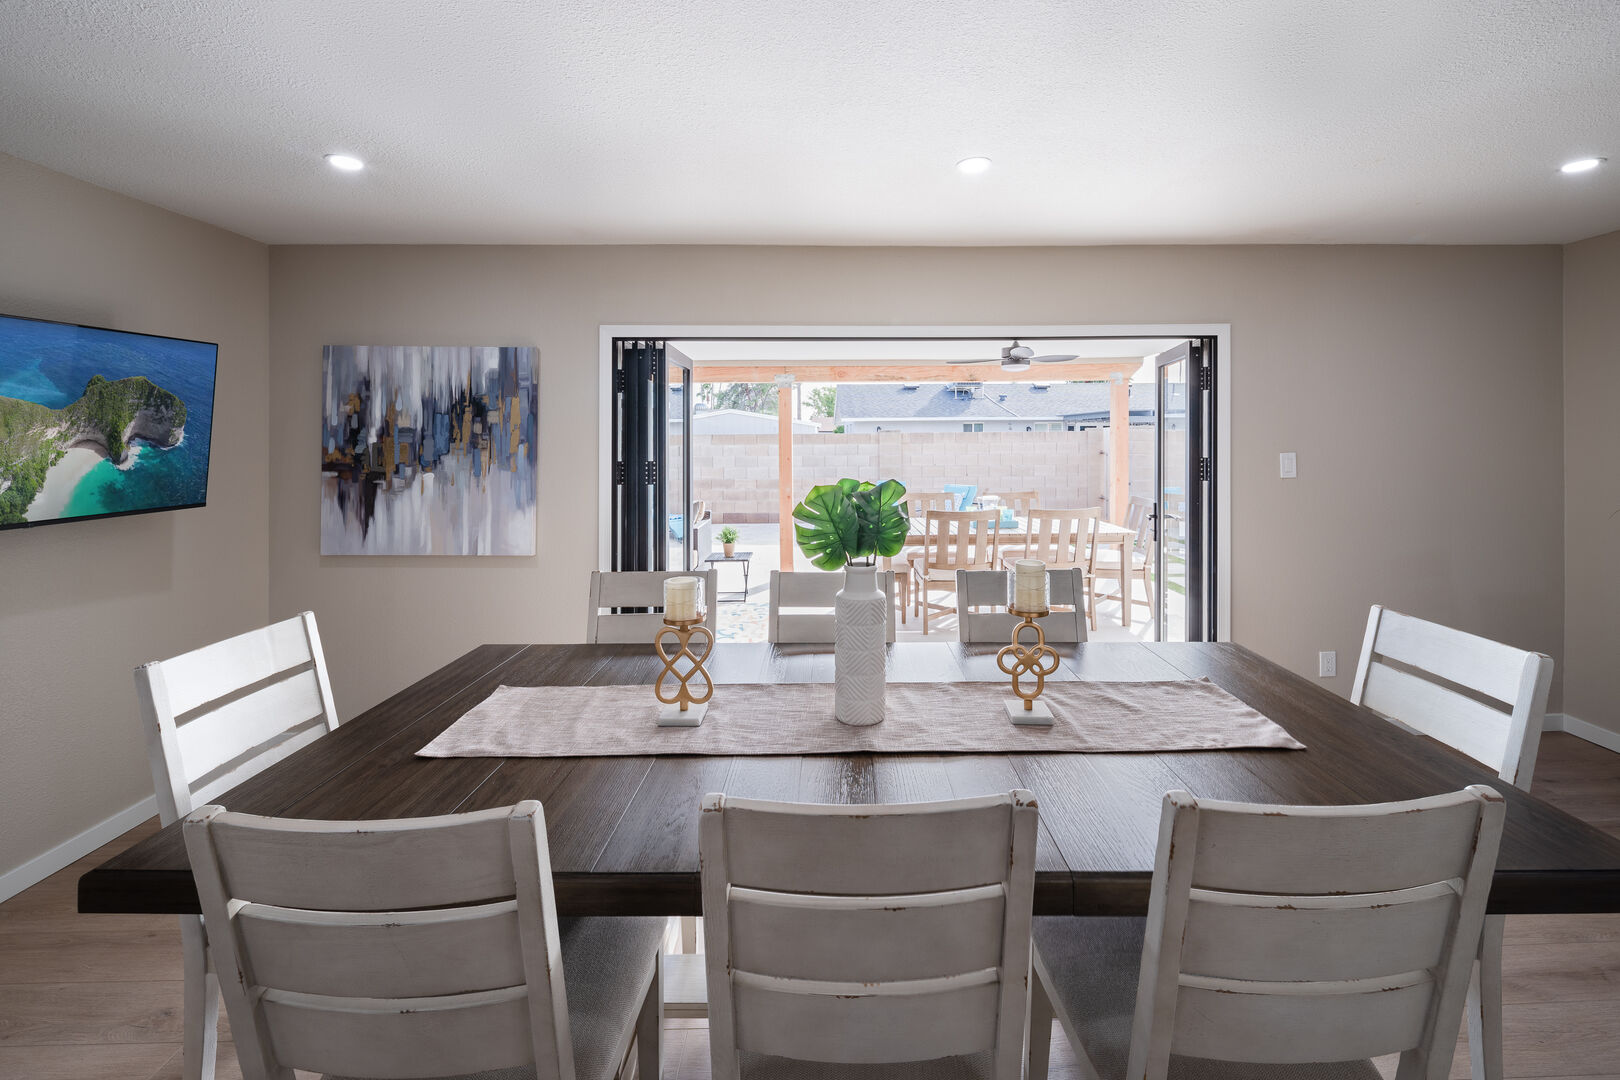 Dining area in kitchen with large accordion opening doors, Smart TV, and direct access to kitchen.